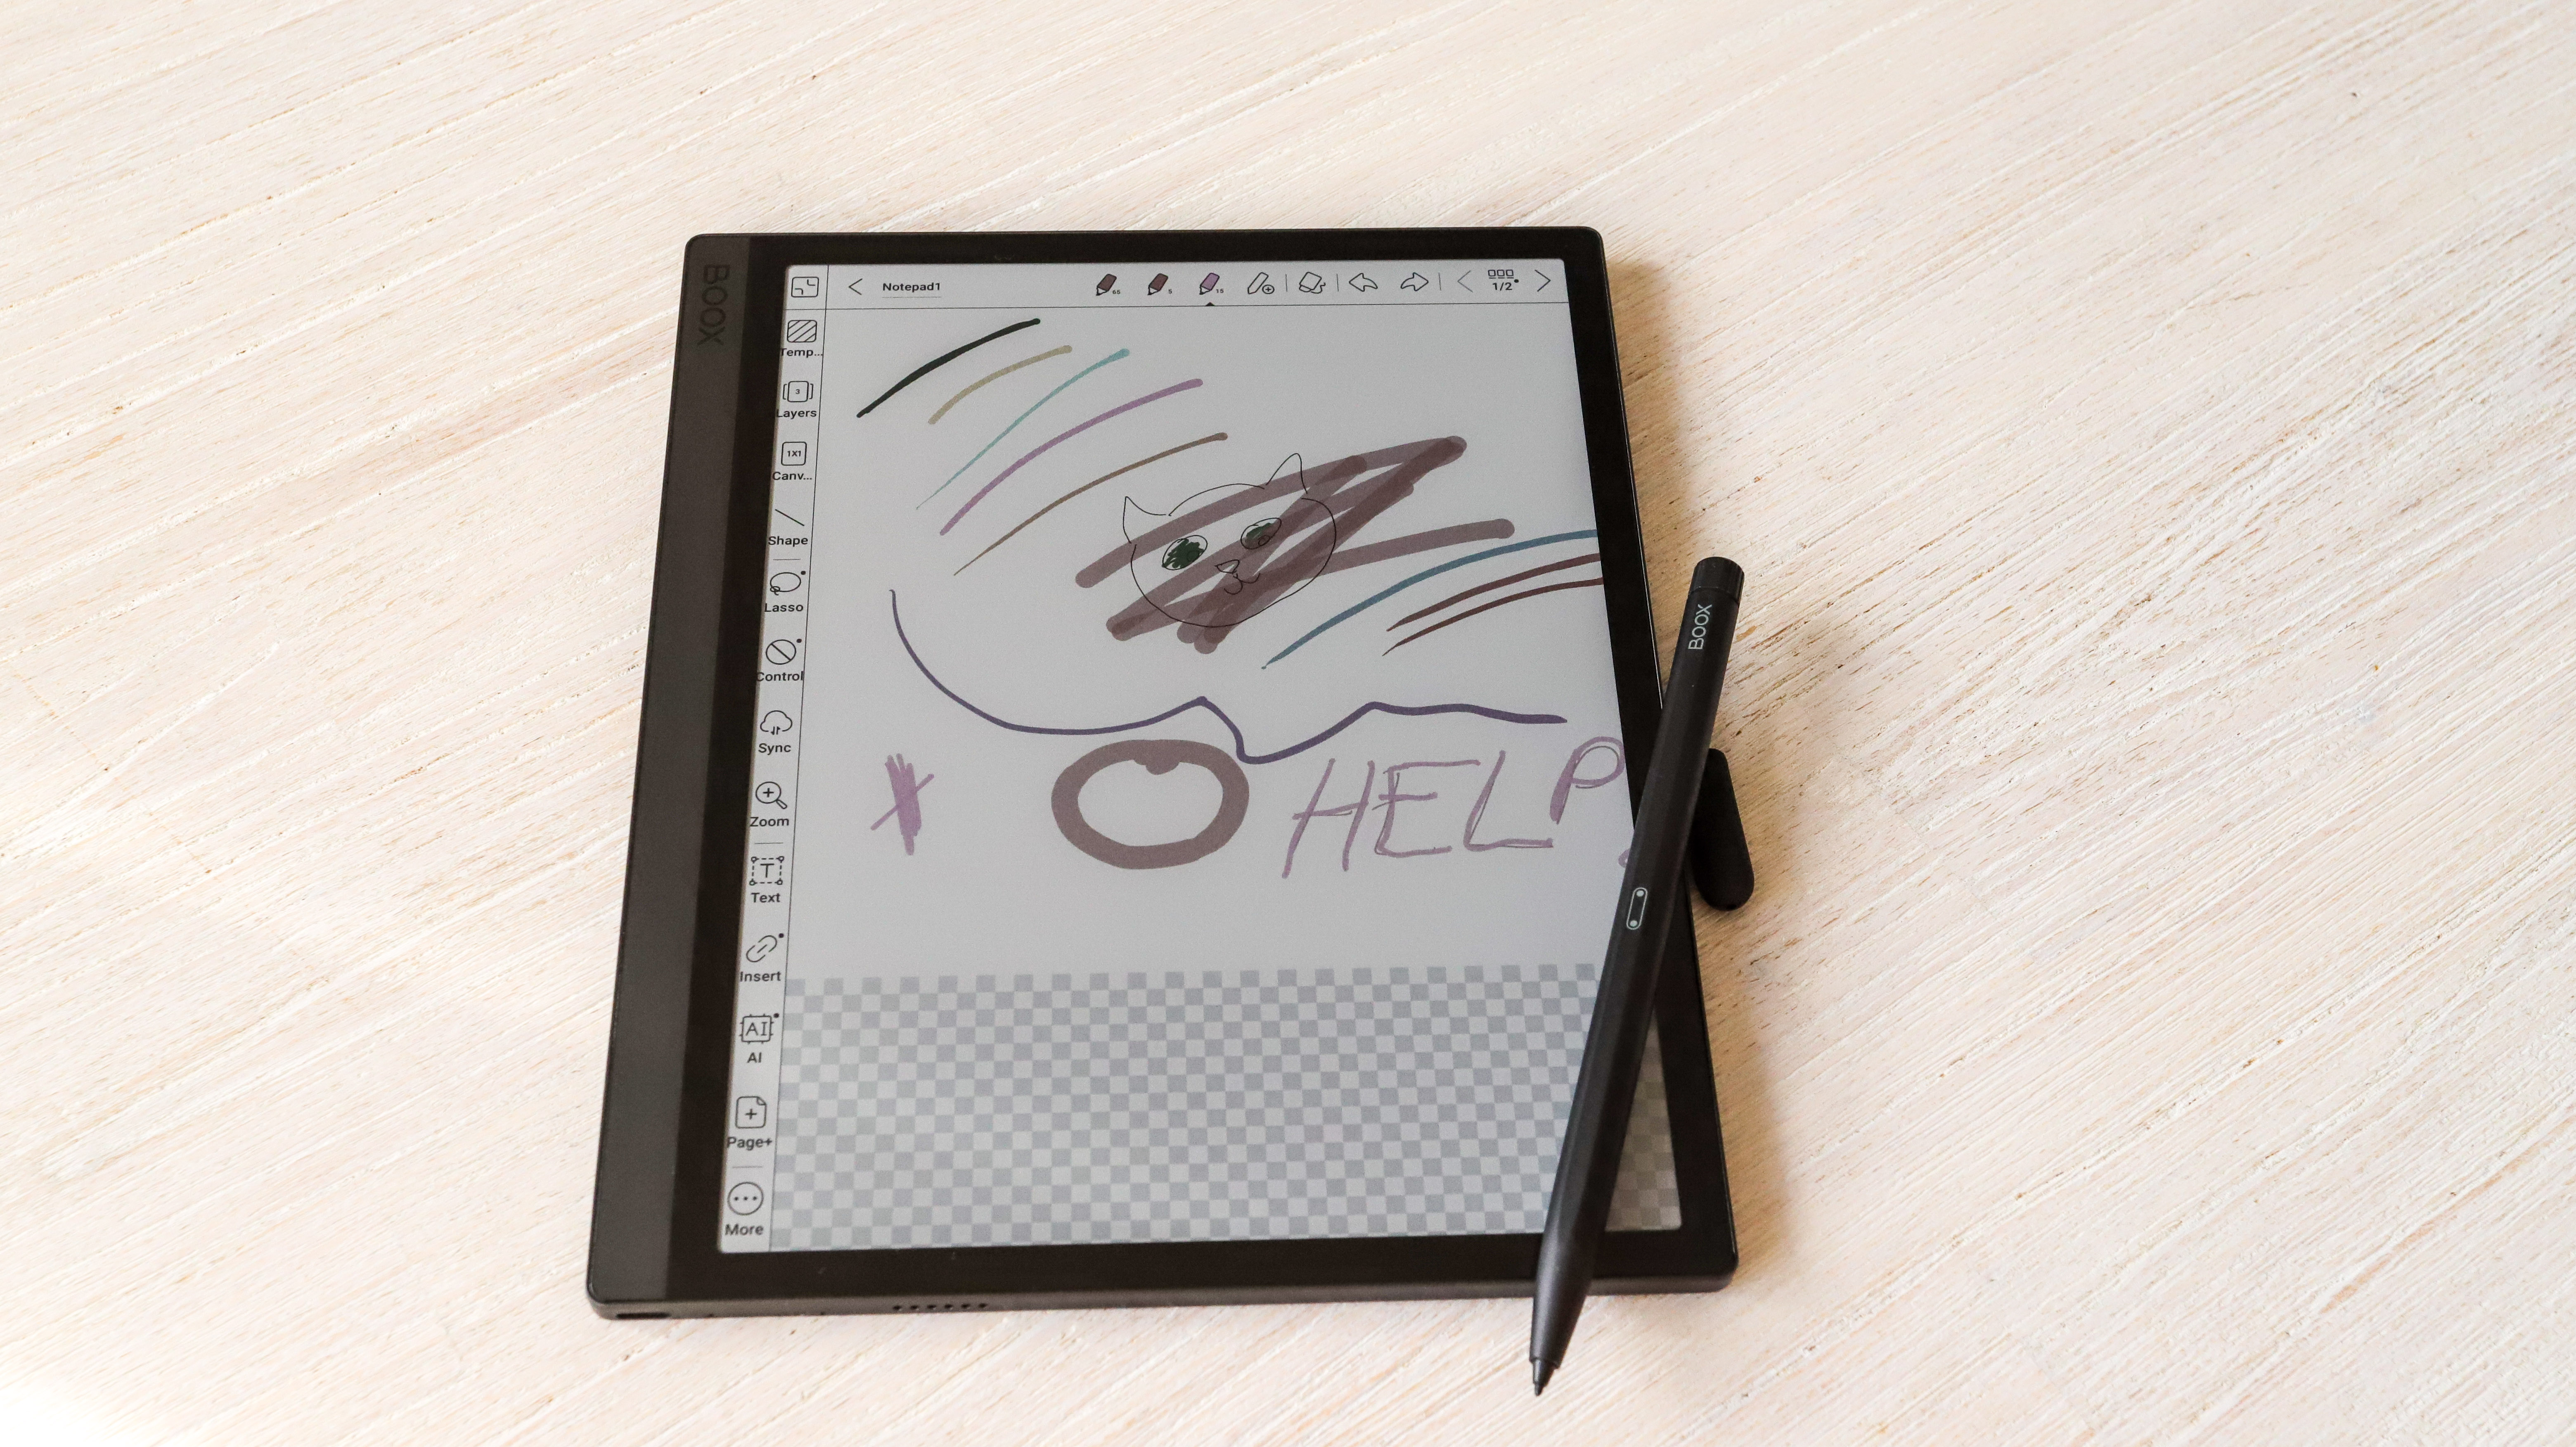 Drawings can be in color on the Onyx Boox Tab Ultra C